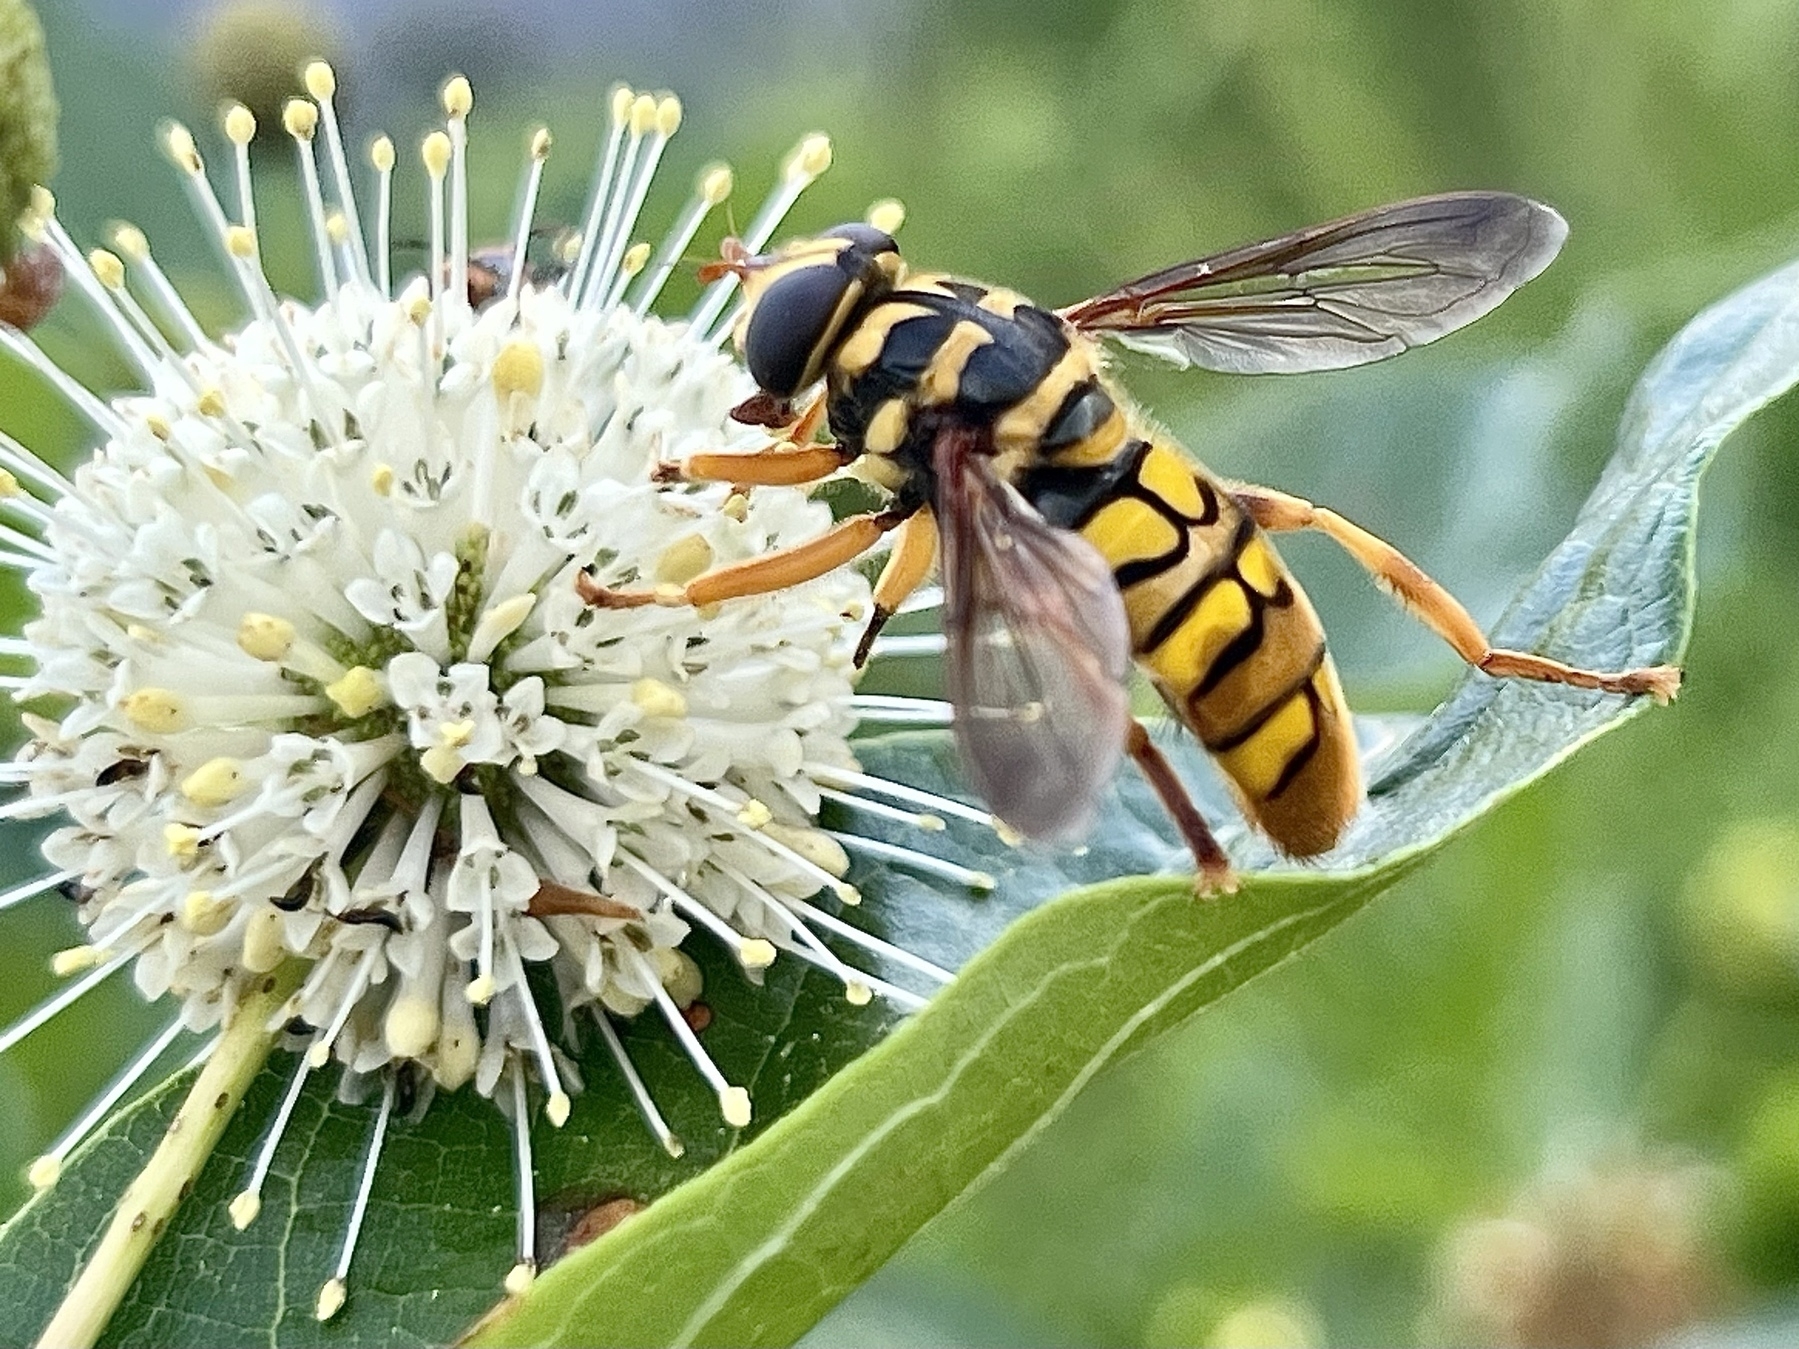 A large intimidating looking hoverfly is striped alternately in black and yellow giving it the appearance of a stinging yellow jacket. The fly is perched on a cream colored ball that is covered with delicate white stems, each topped with yellow.